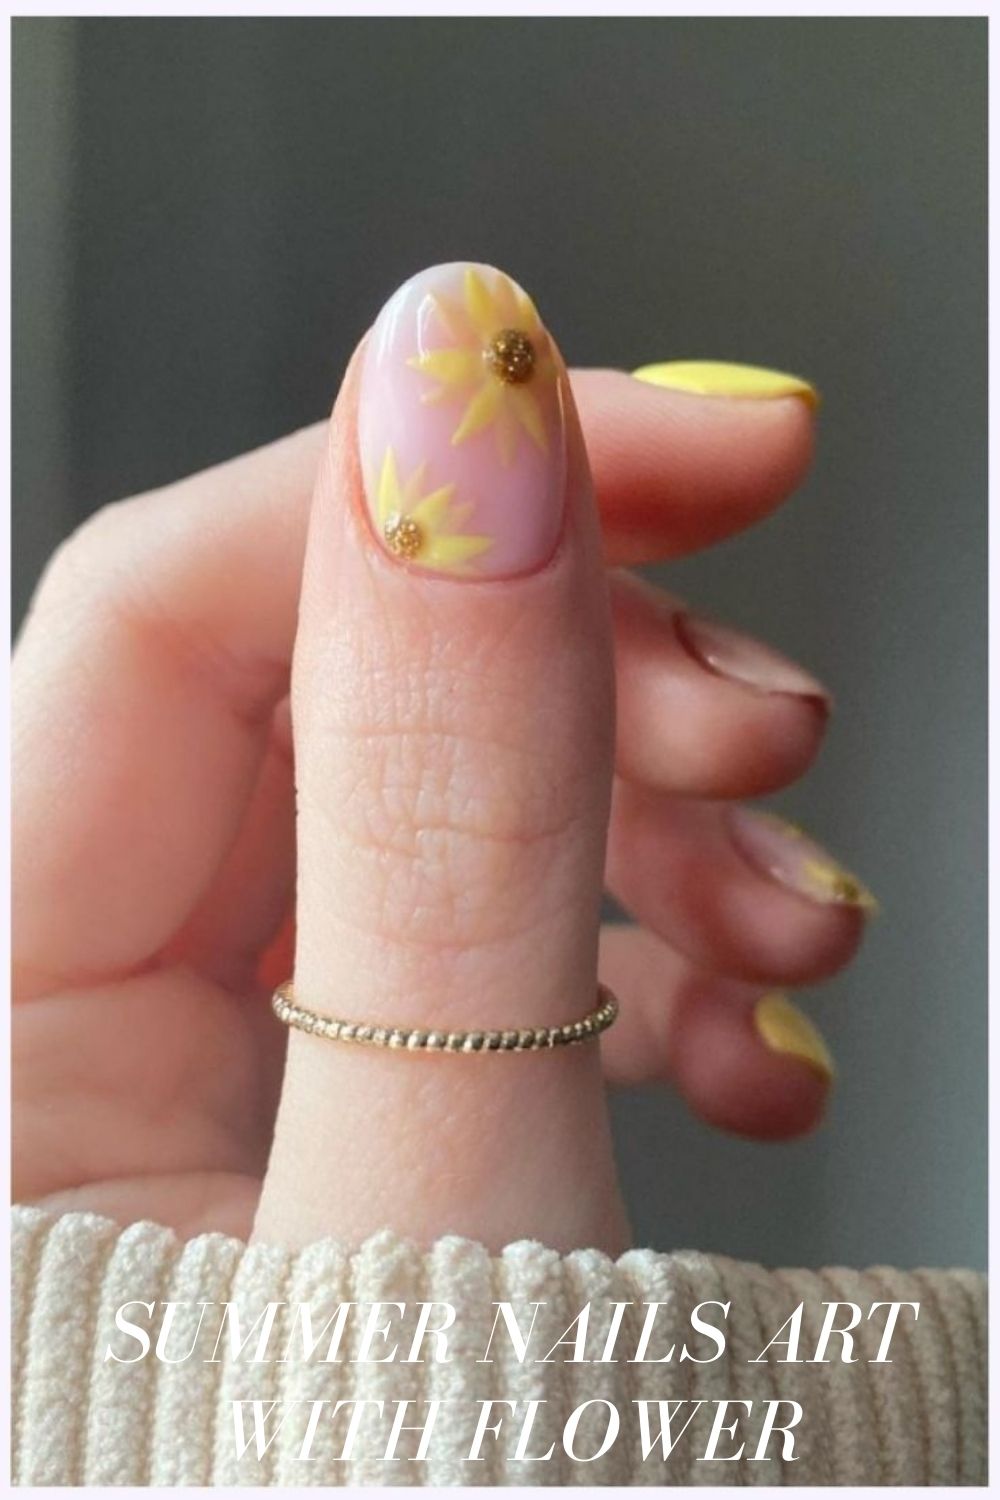 Short nails ideas for sunflowers